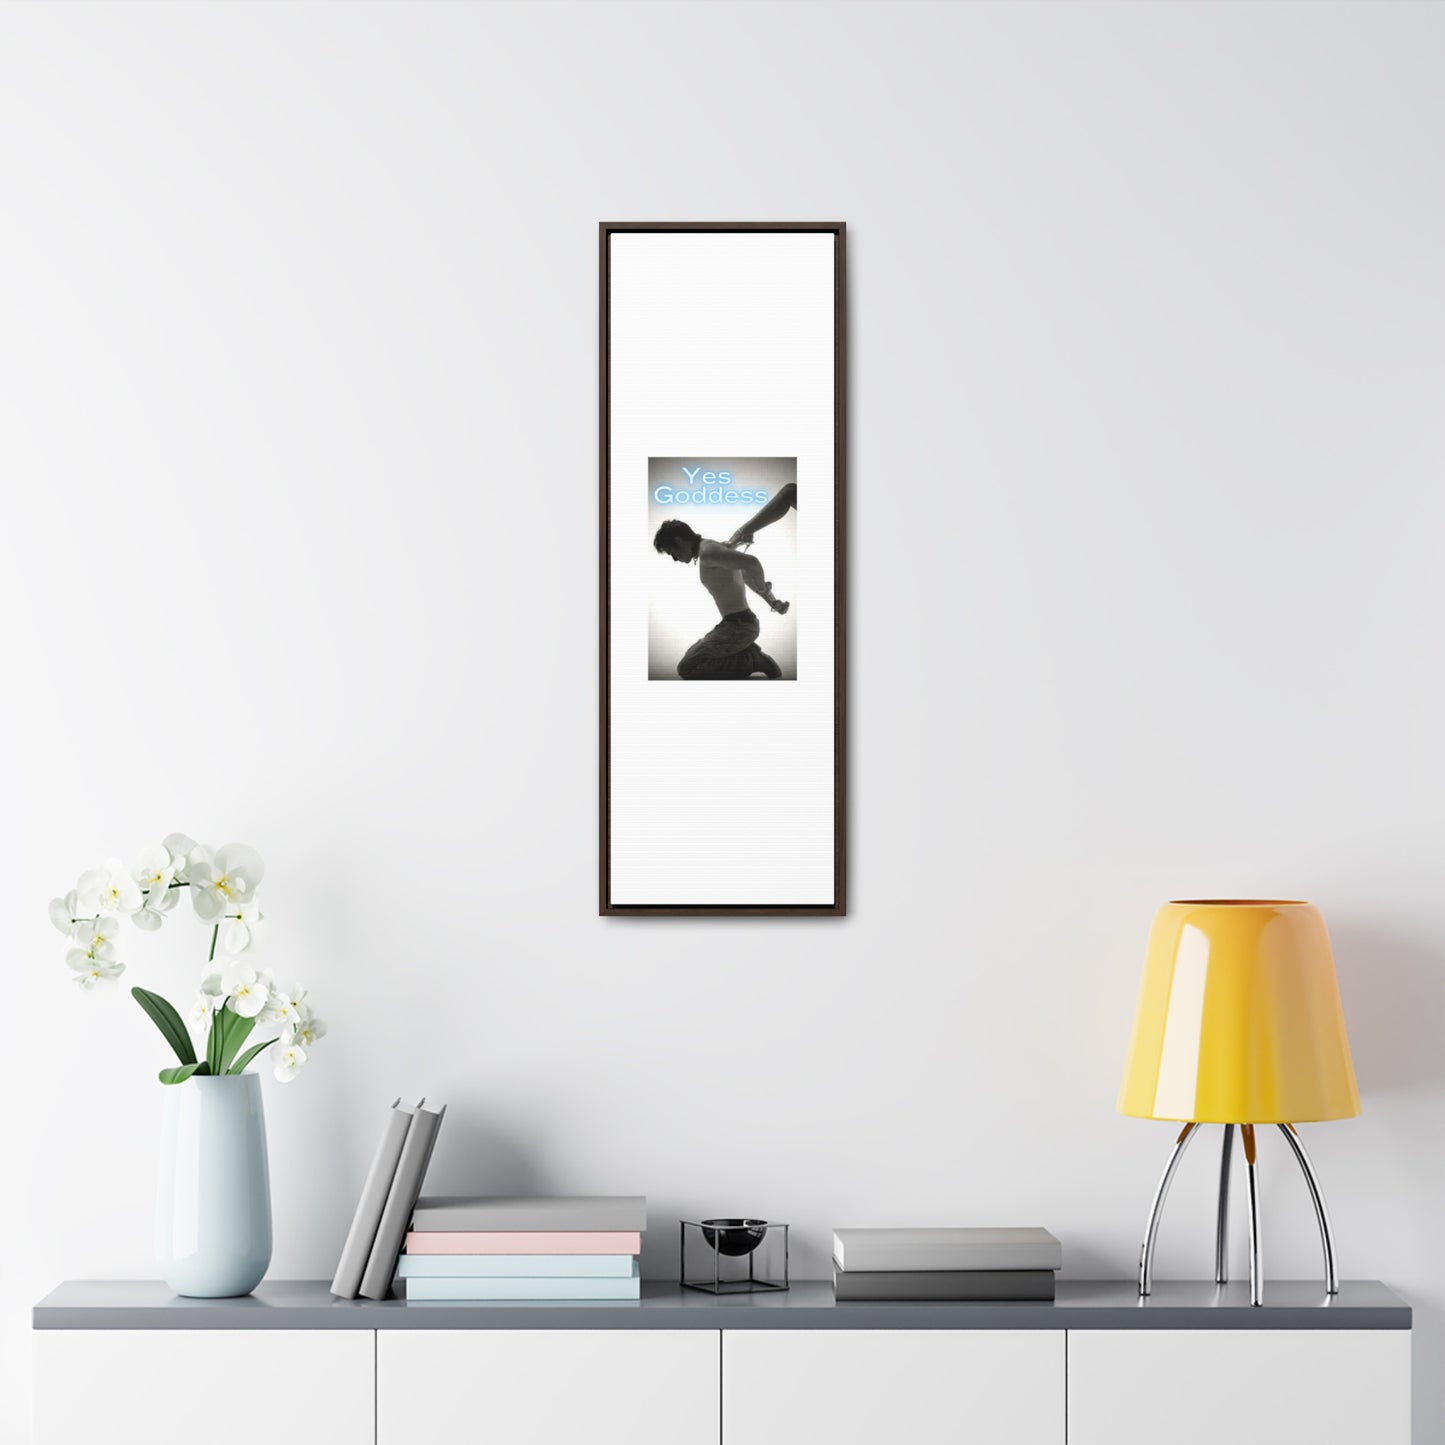 Gallery Canvas, Vertical Frame